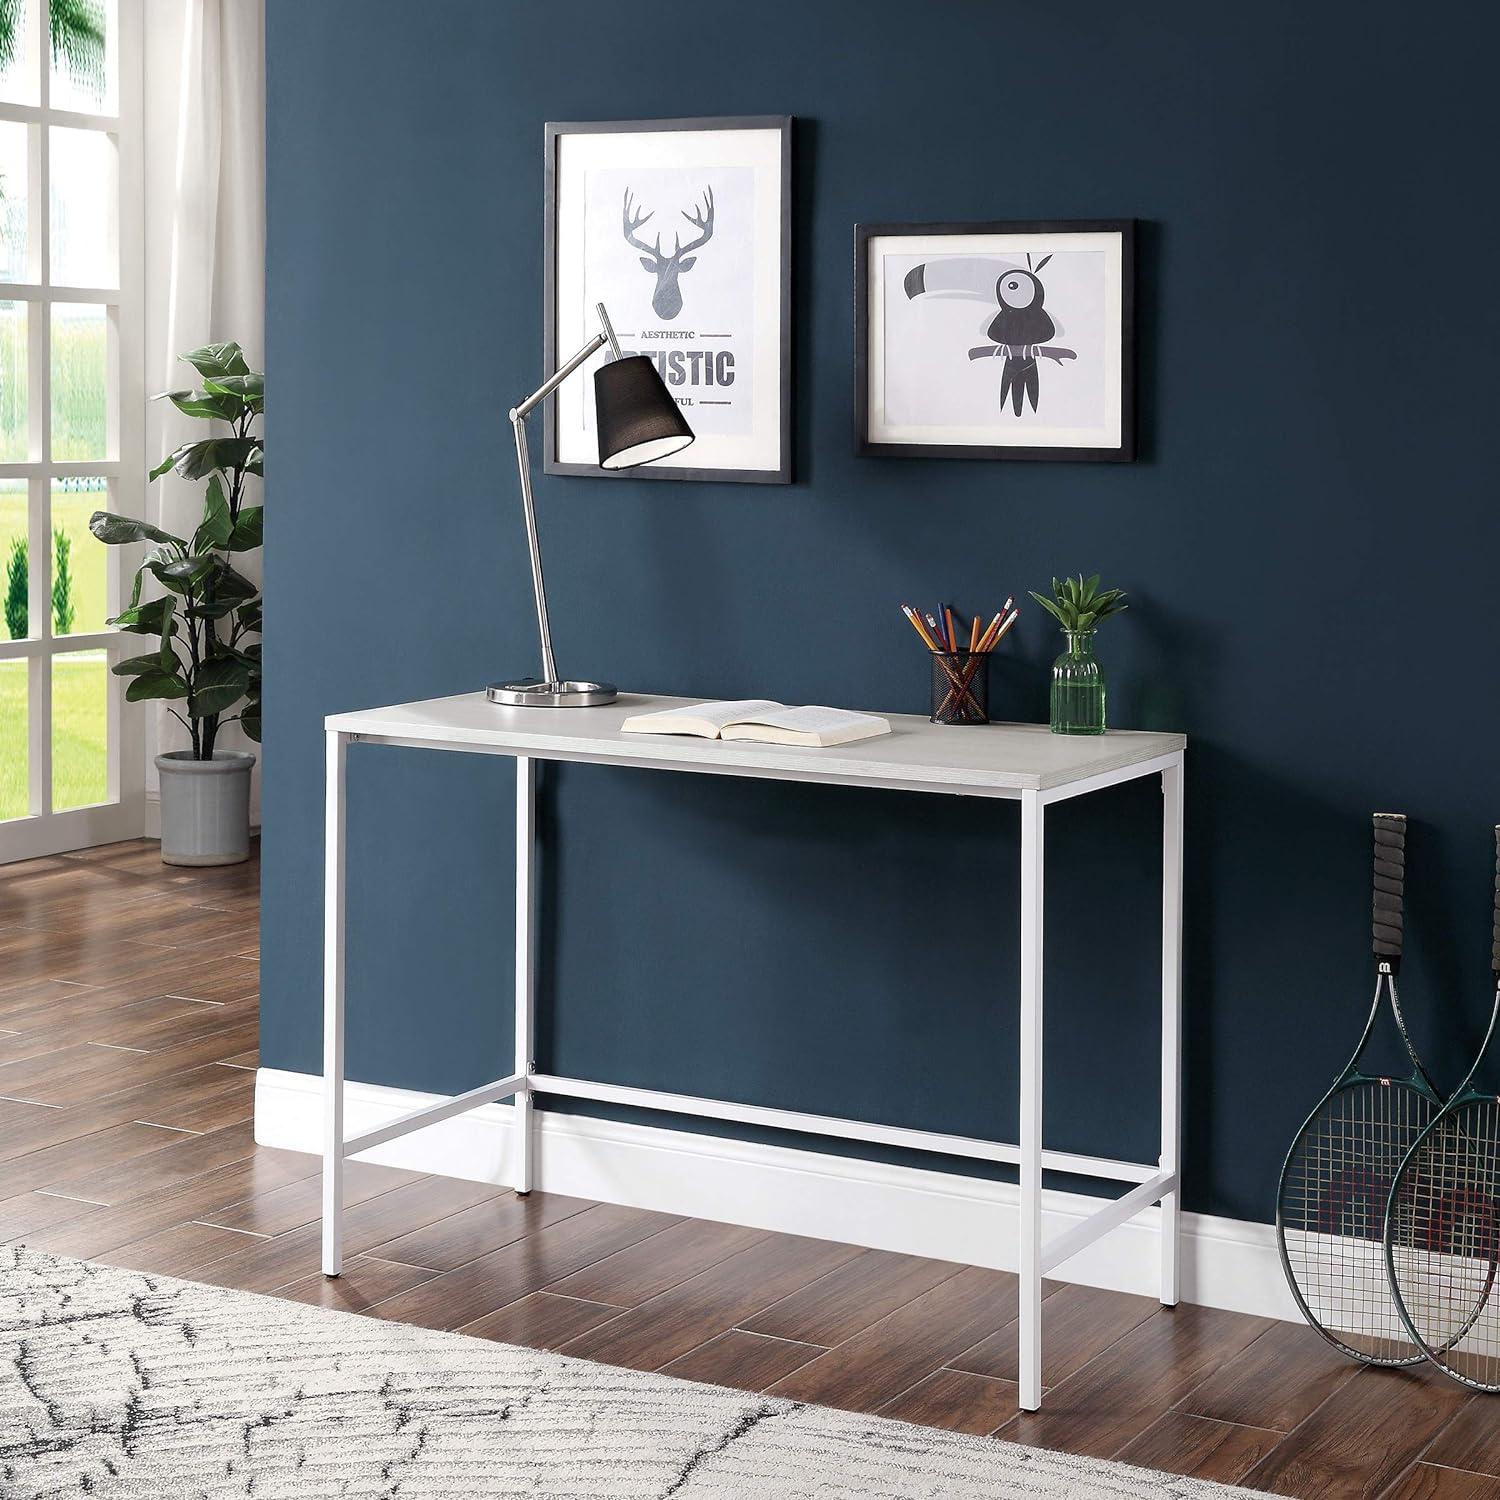 Contempo White Oak 41.7" Home Office Desk with Steel Legs and Drawer